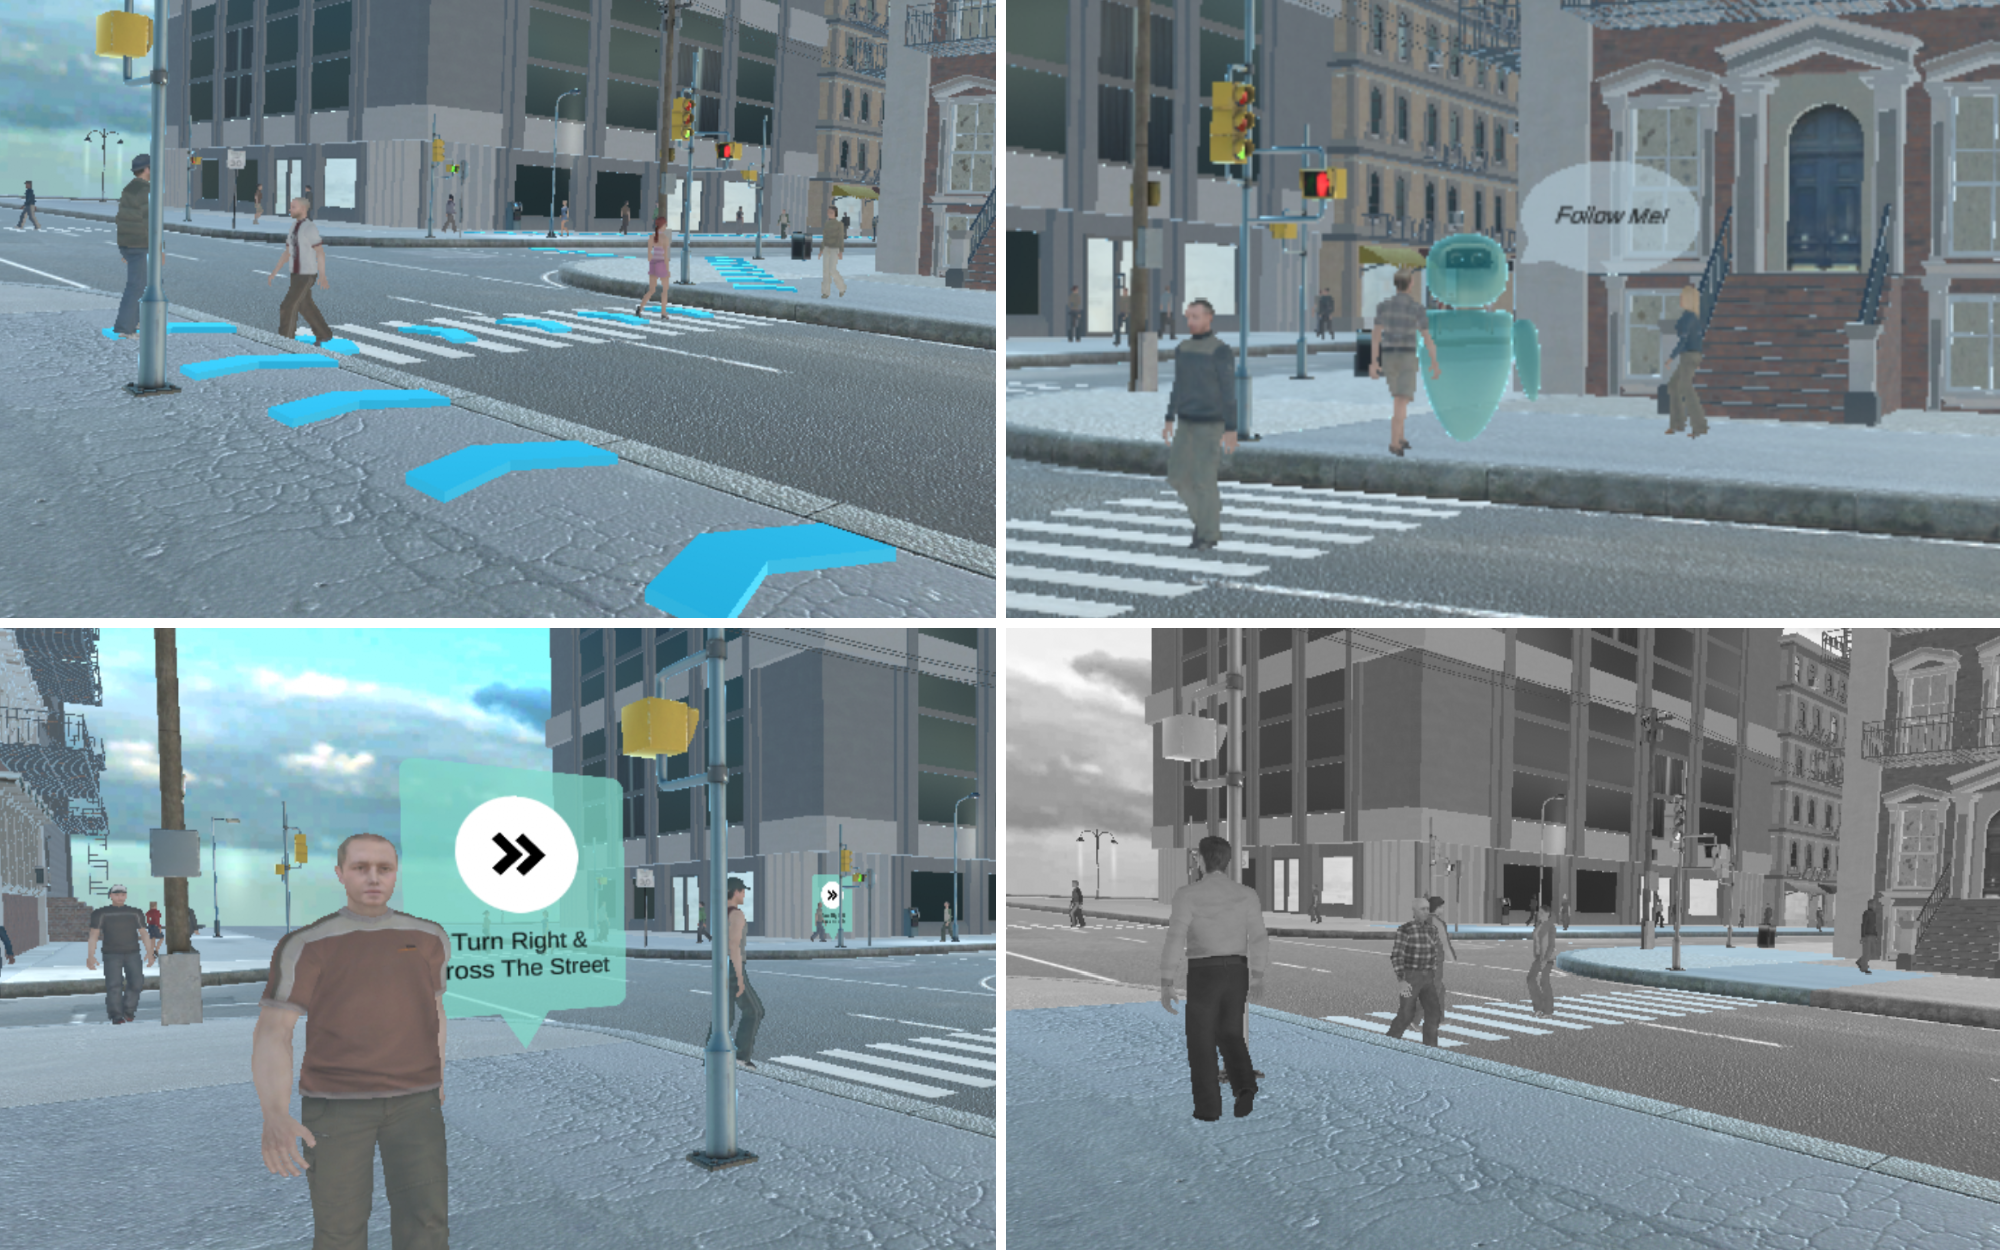 Four well-liked navigation instructions for mixed reality, including arrows (top left), avatar (top right), call outs (bottom left), and desaturation (bottom right).